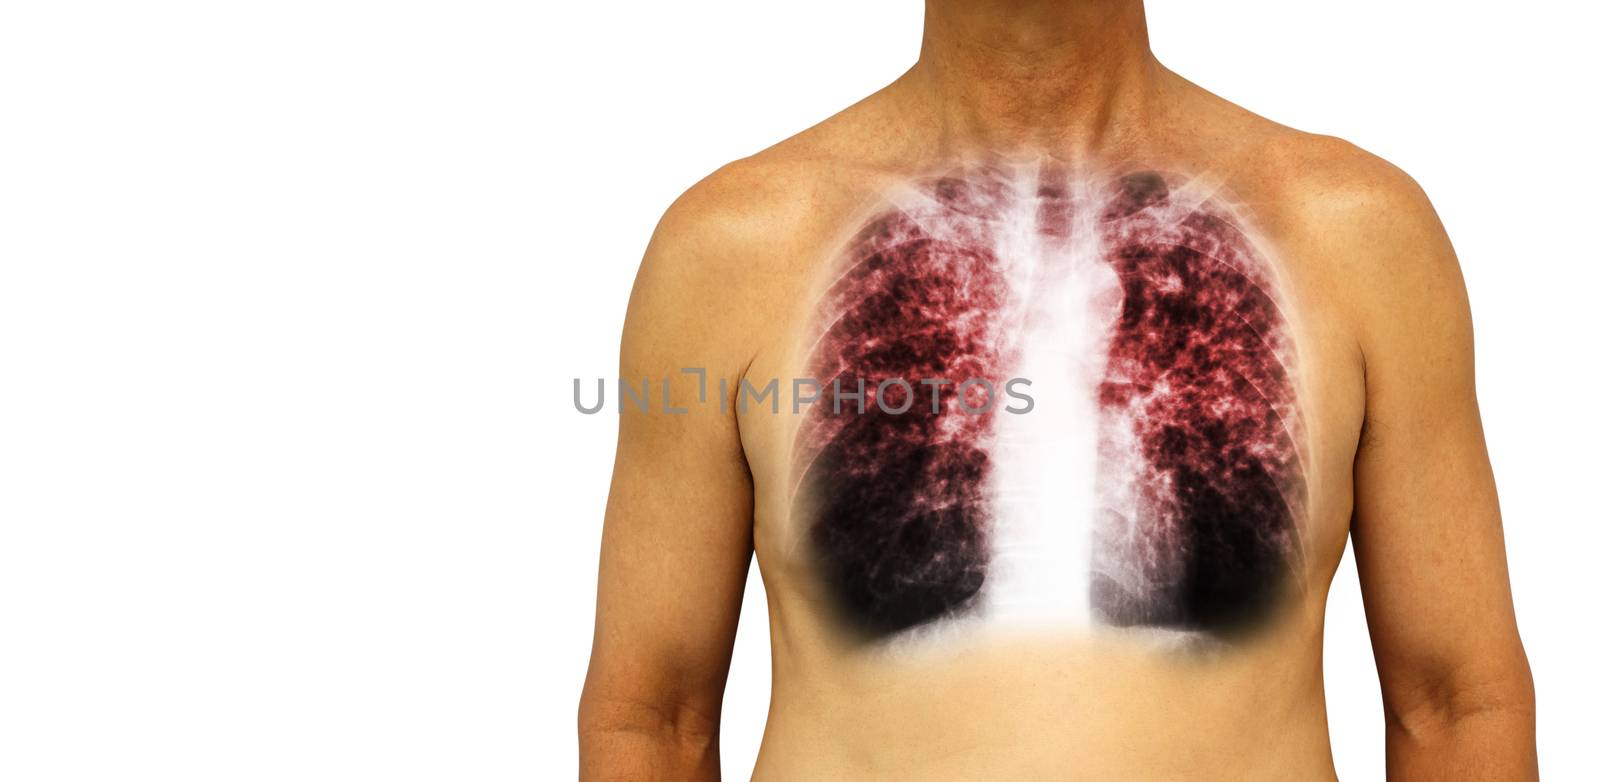 Pulmonary tuberculosis . Human chest with x-ray show interstitial infiltrate both lung due to infection . Isolated background . Blank area at Left side .